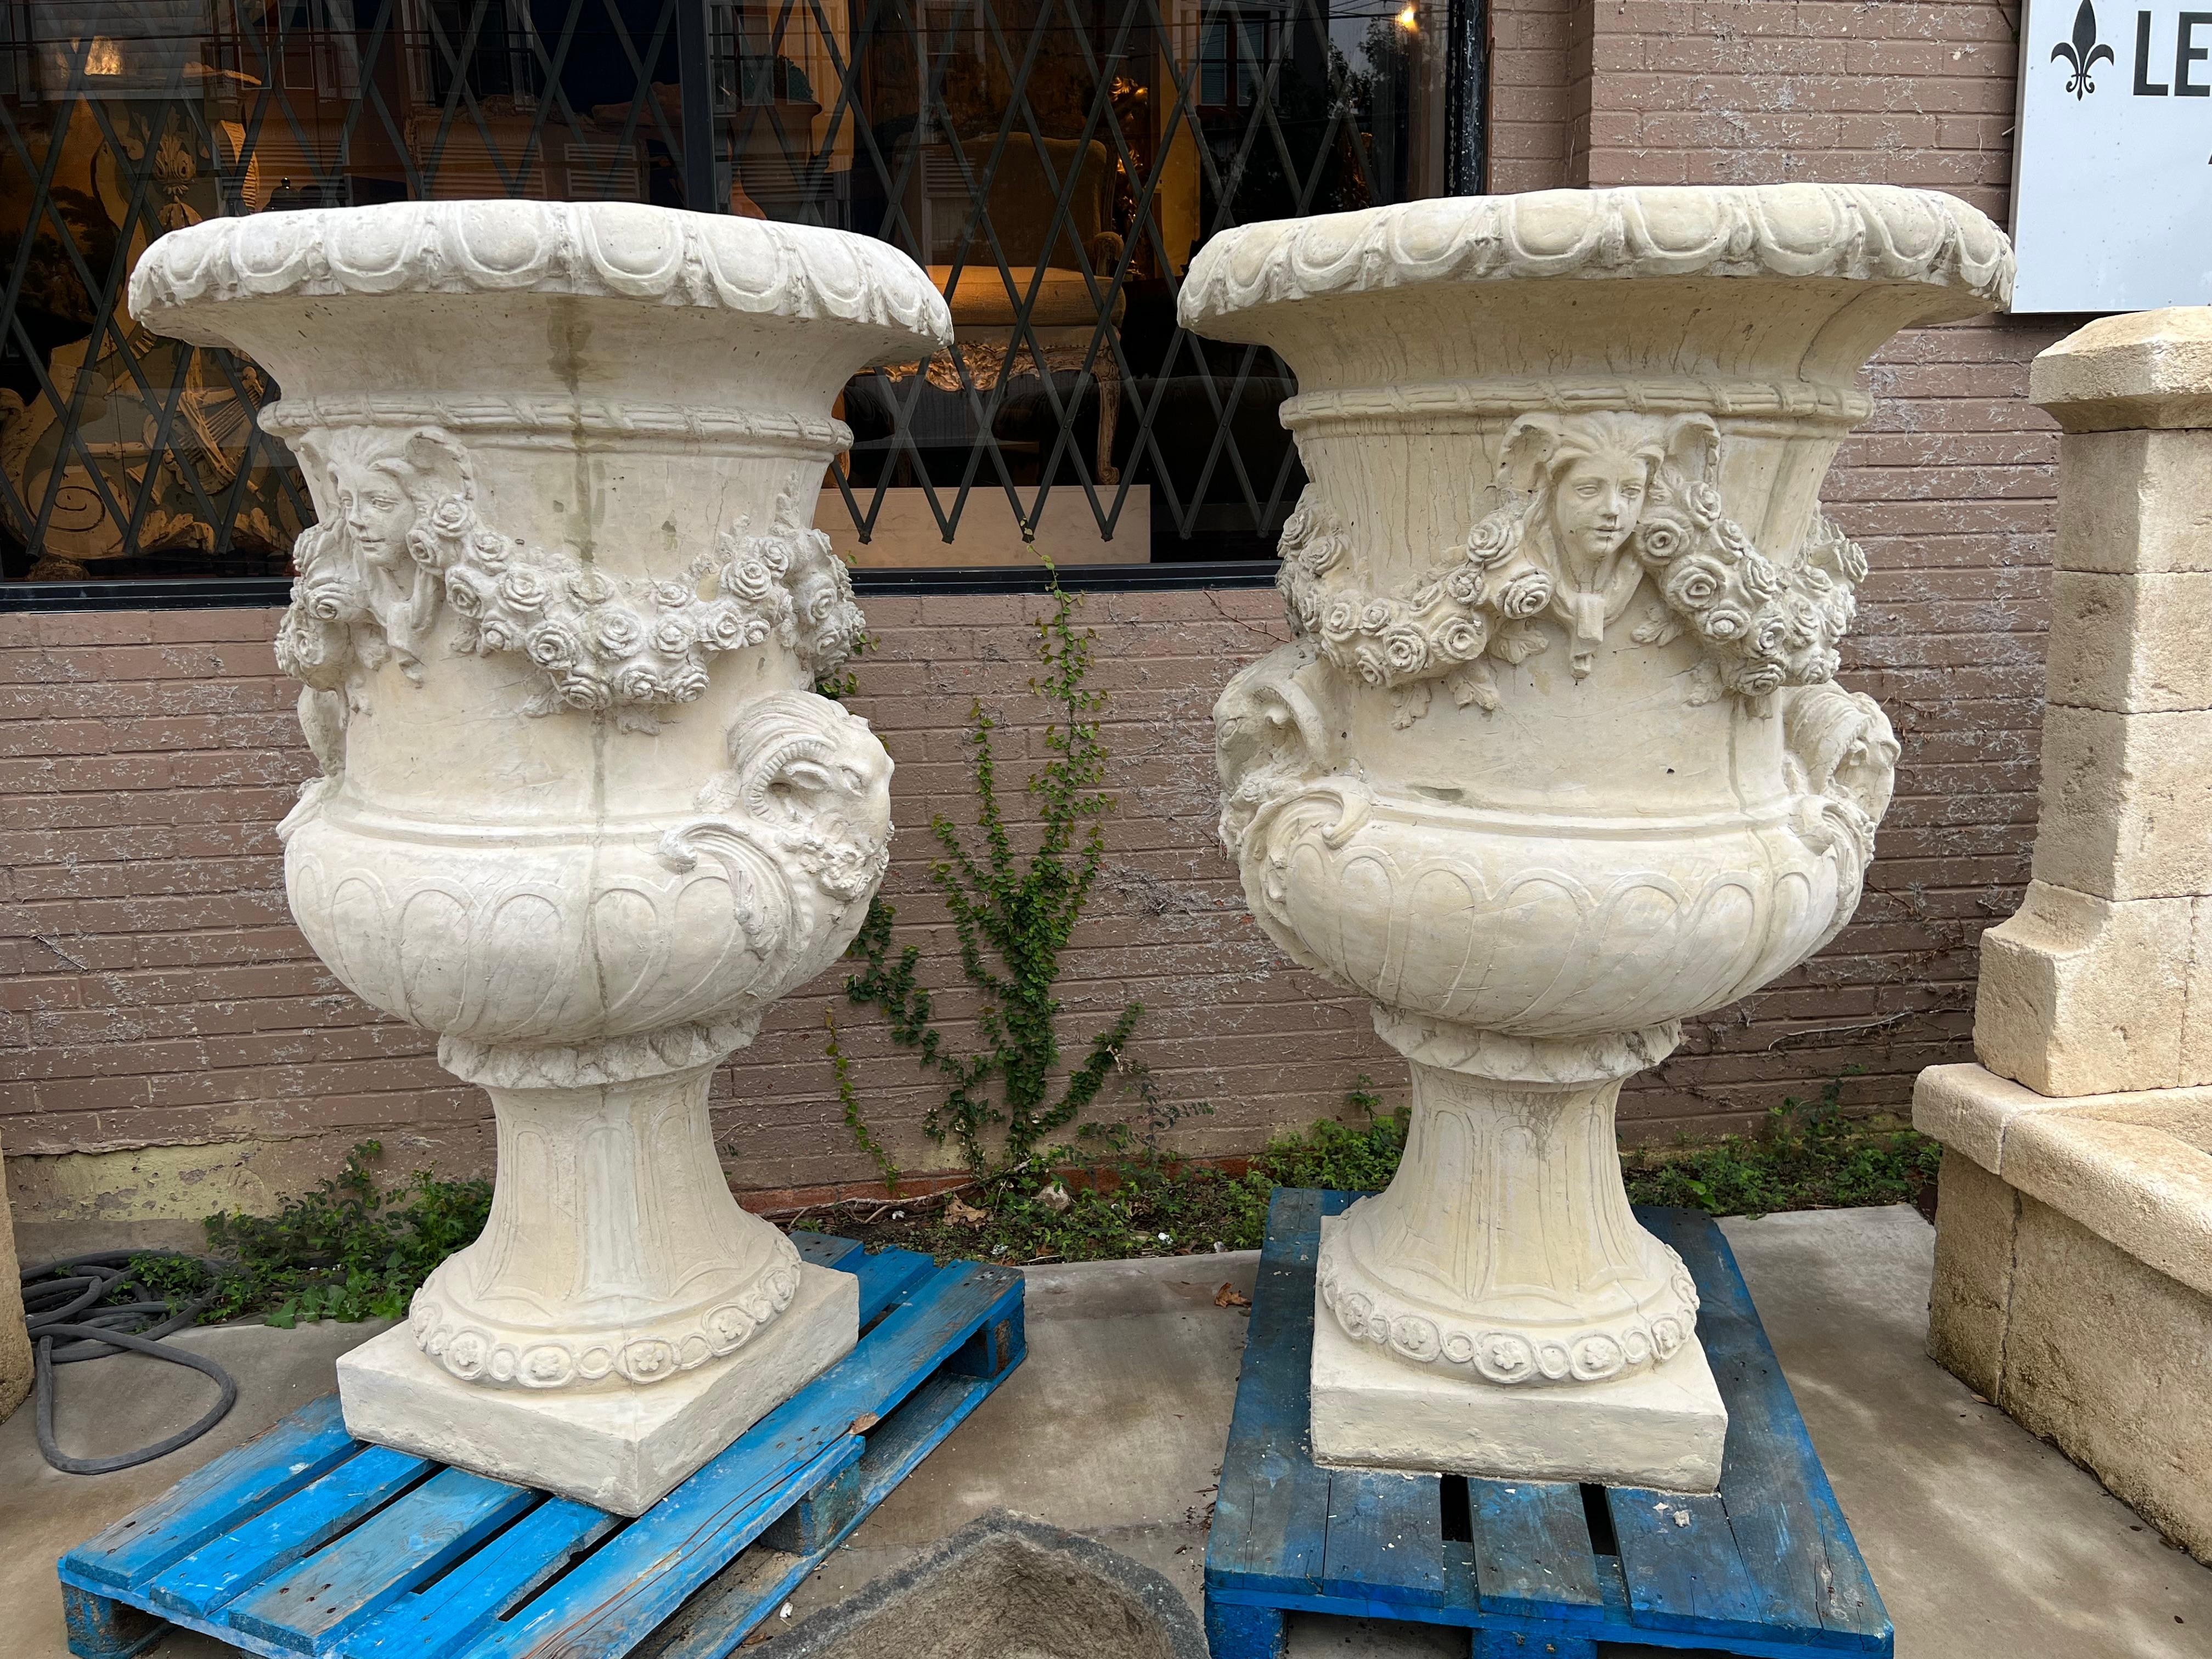 These huge urns, cast in France from crushed stones and cement measure an astounding 63 inches tall.  They are nearly the same dimension as the original “Vase du Printemps” from which they are based upon.  The vase was part of a set of four designed